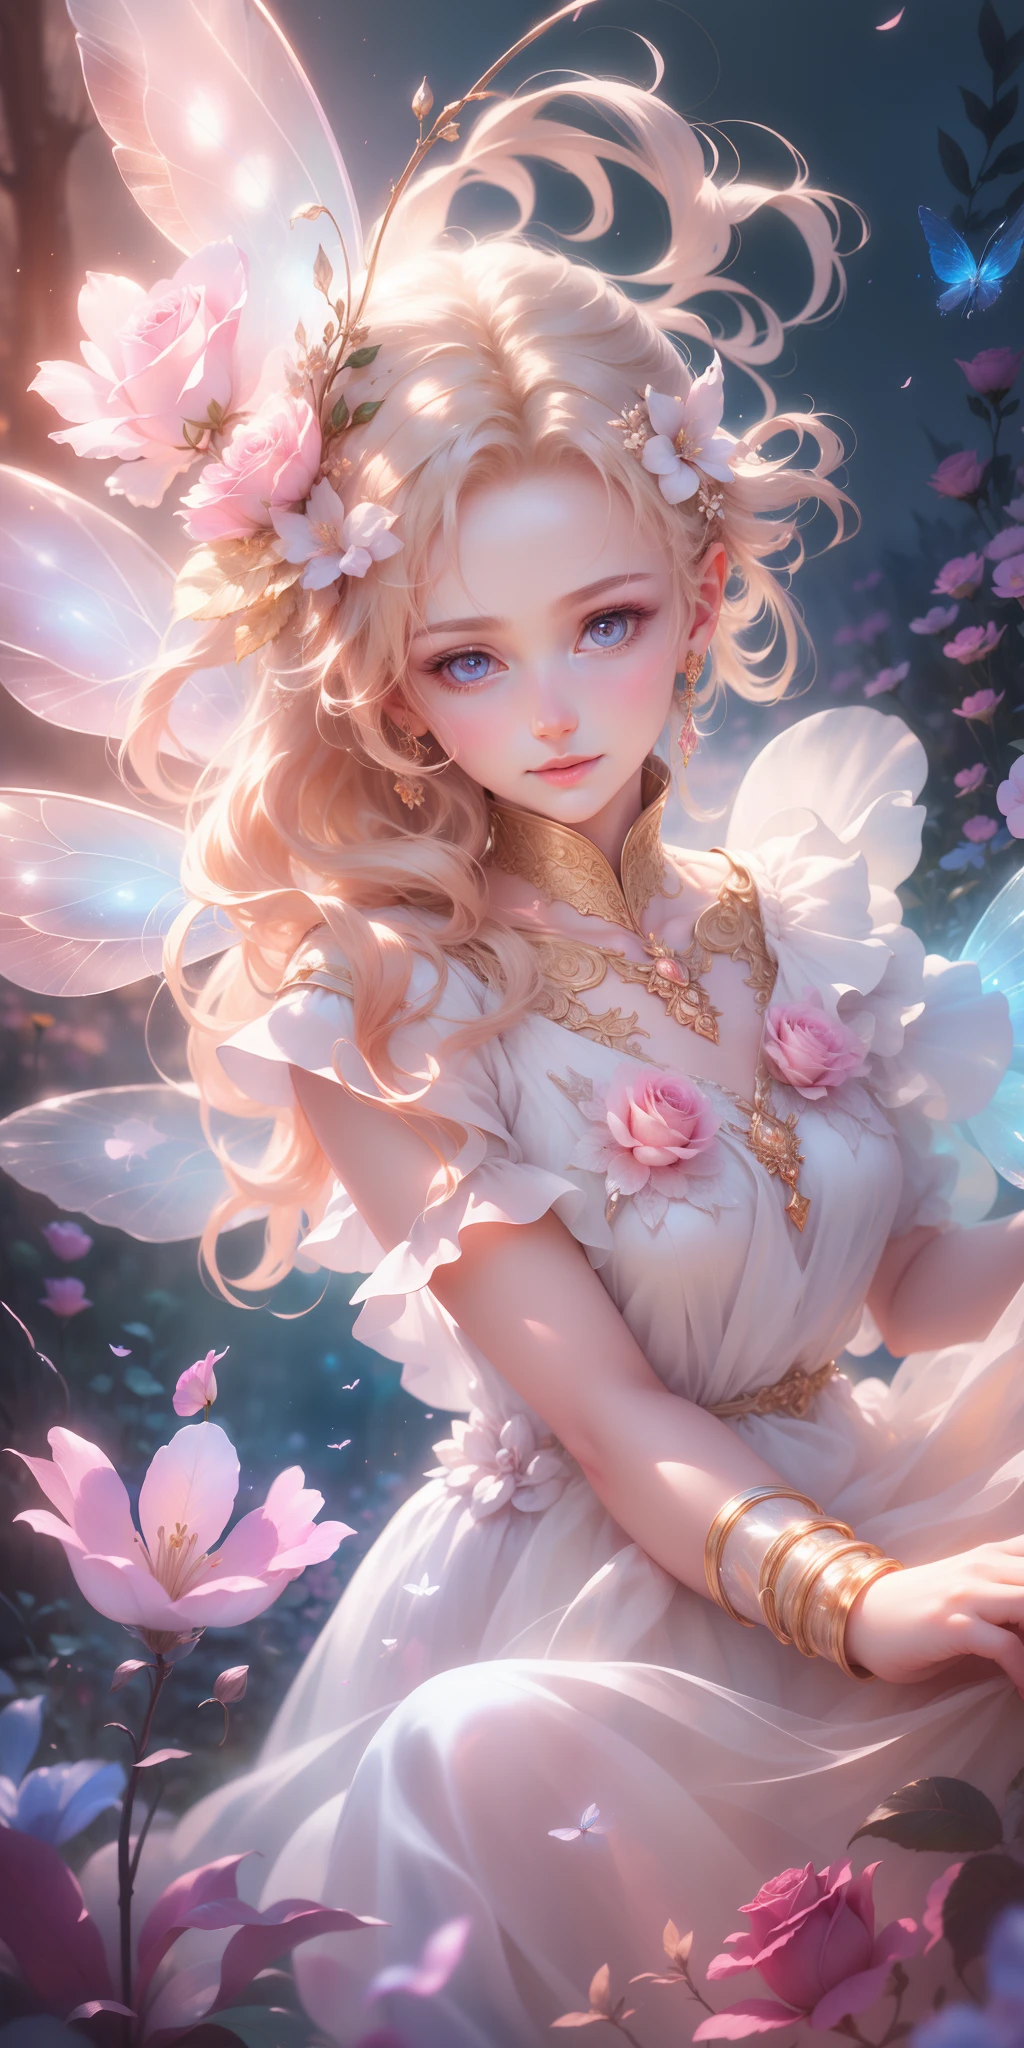 Beautiful transparent flower fairy baby, Transparent colorful wings, The wand flutters in the wind､The wand flashed with starlight，Golden wand，Beautiful blue sky and white clouds、Girls have transparent wings､kindly smile､Beautiful garden background､Gentle and transparent，anatomy correct, Delicate pattern，Pink rose space, Soft lighting, ( Bokeh)，Masterpiece, Super detailed, Epic composition, Highest quality, 8K，Epic romantic fantasy digital art，Epic fairy tale fantasy digital art，Mythological fantasy，UHD resolution，Detailed detail drawing，realisticlying，Very realistic，cinmatic lighting,an award winning photograph,rich colours，hyper realistic lifelike texture，dramatic  lighting